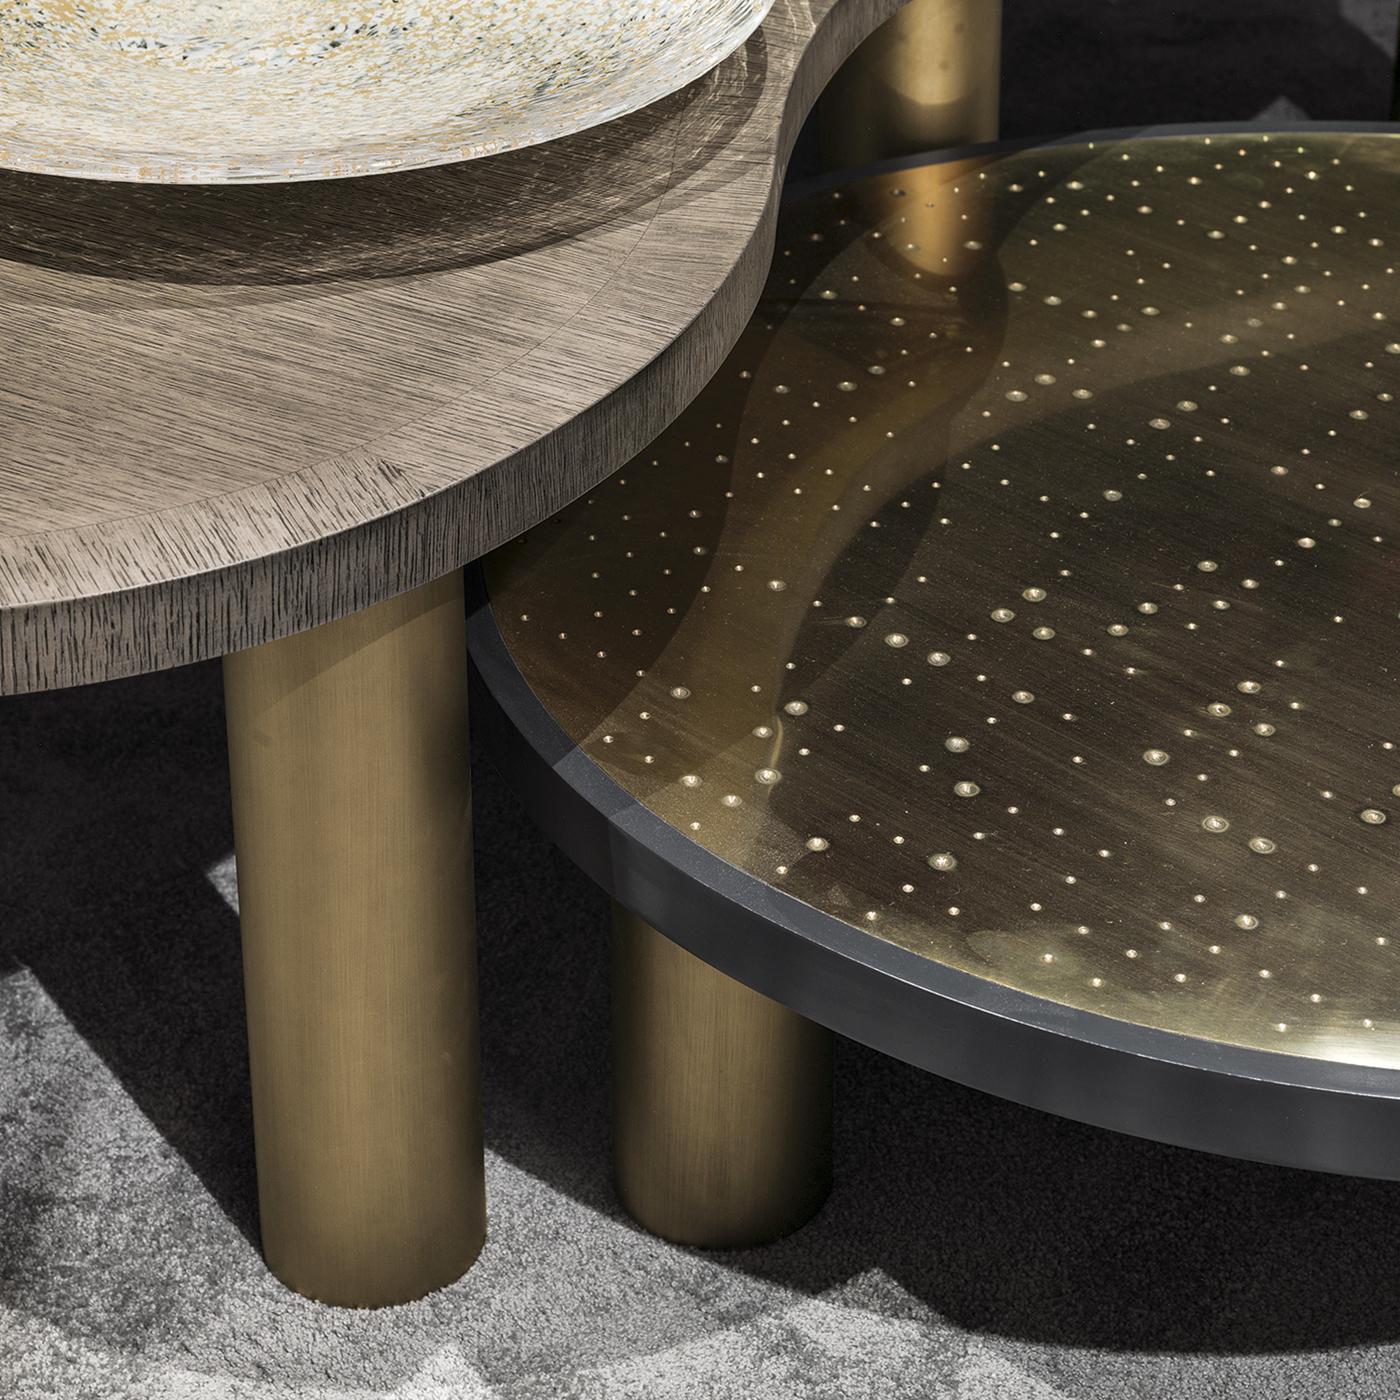 Low to the ground, the Golden Jade Coffee Table will nevertheless receive more than a fair share of attention thanks to its glistening finish. Featuring a wooden top, the table is accented with hand-painted brass detailing. Joining in on the fun are